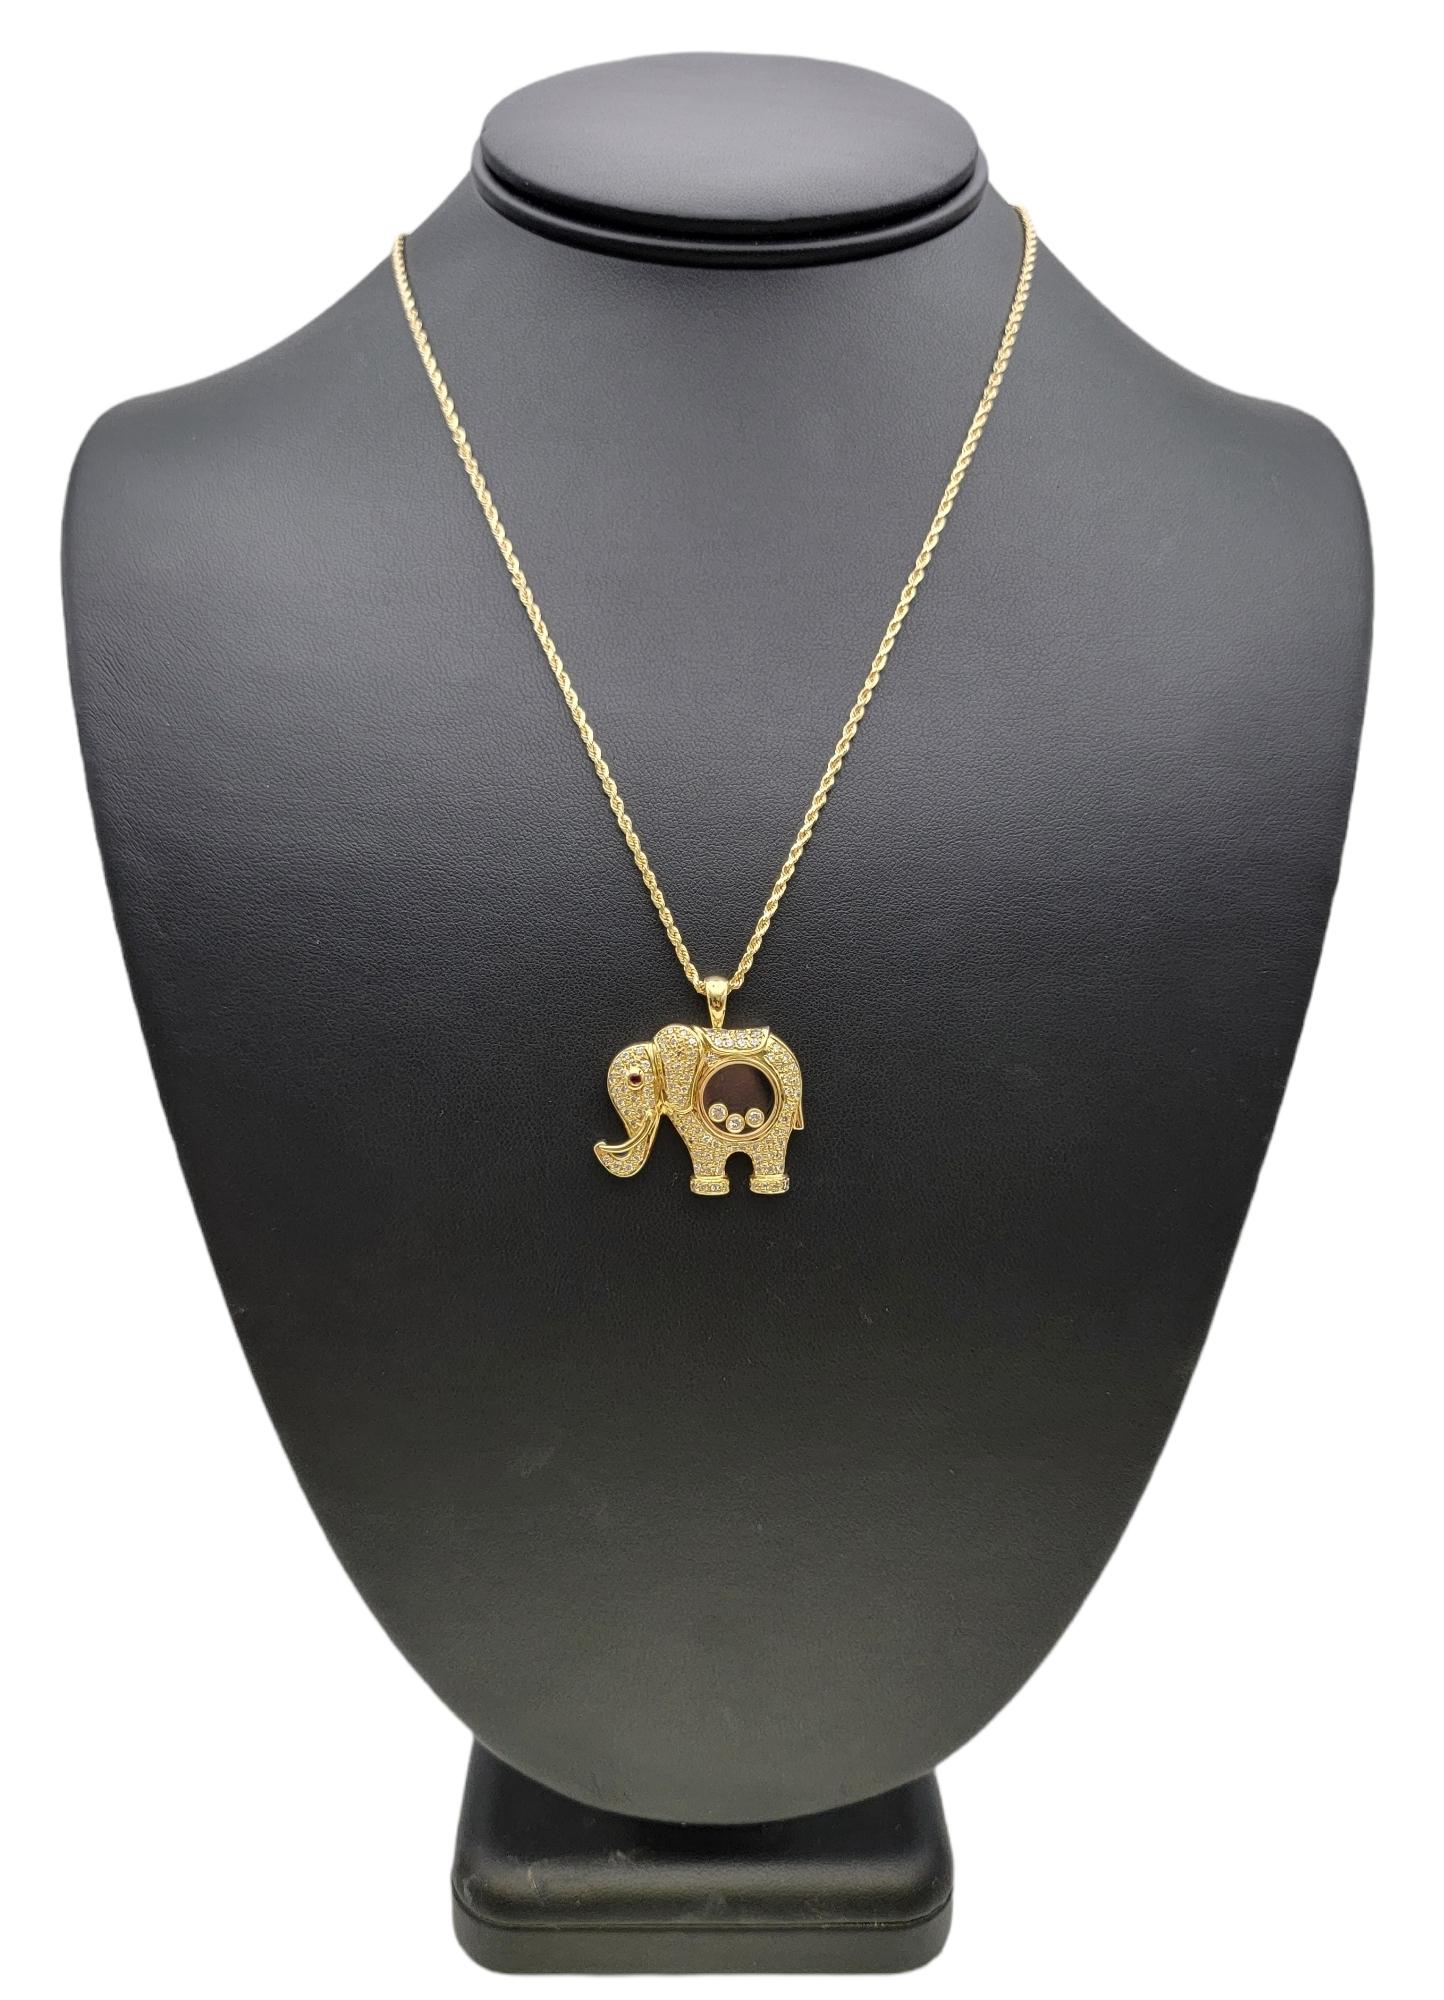 Floating Diamond and Pave Elephant Pendant with Ruby Eye in 18 Karat Yellow Gold 7